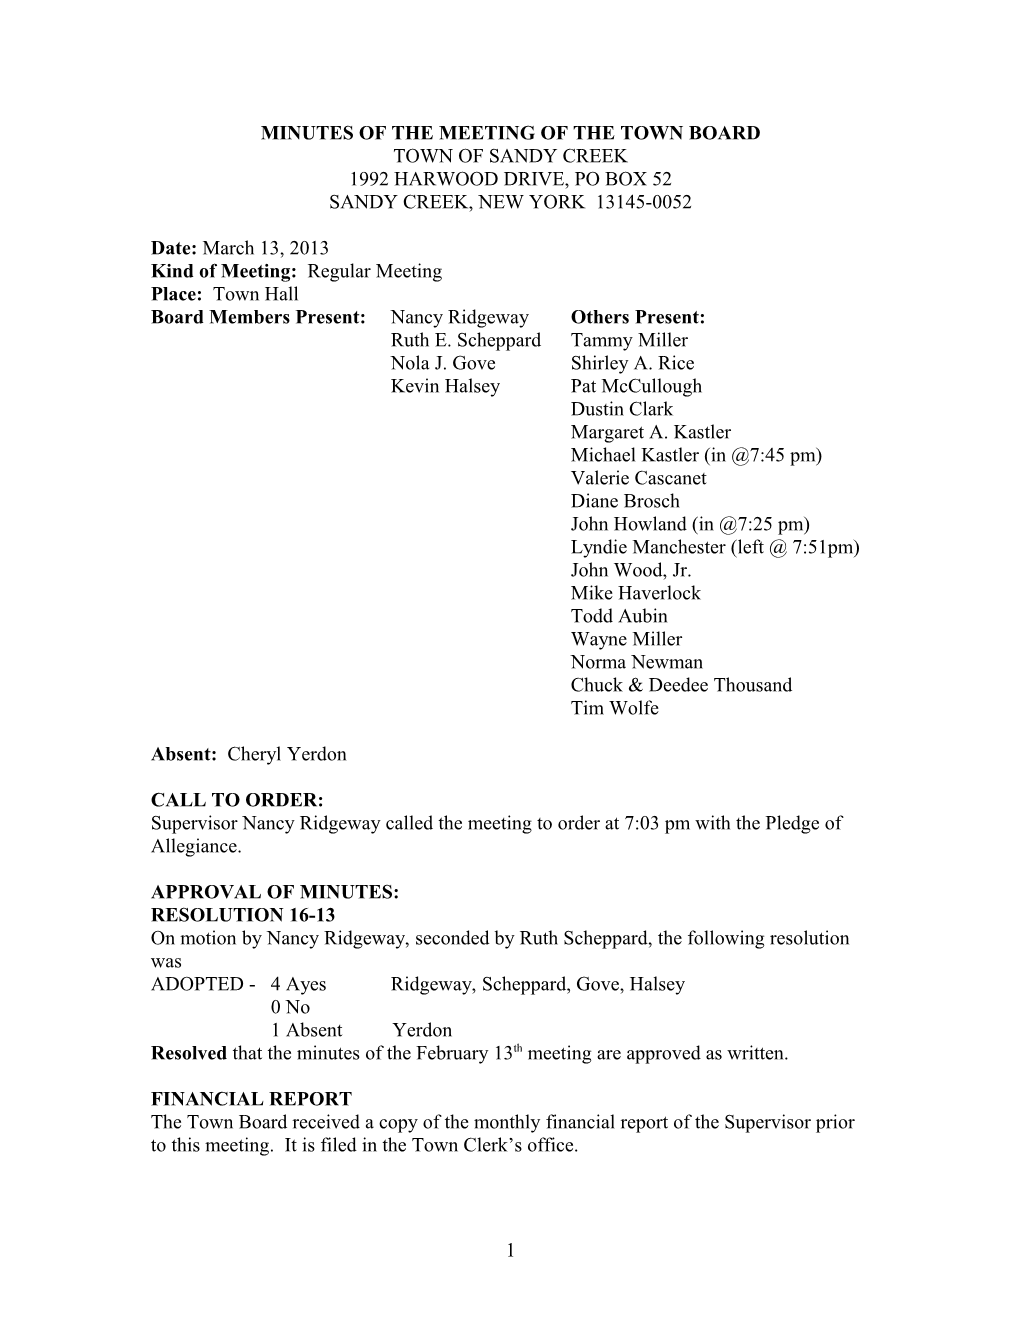 Minutes of the Meeting of the Town Board